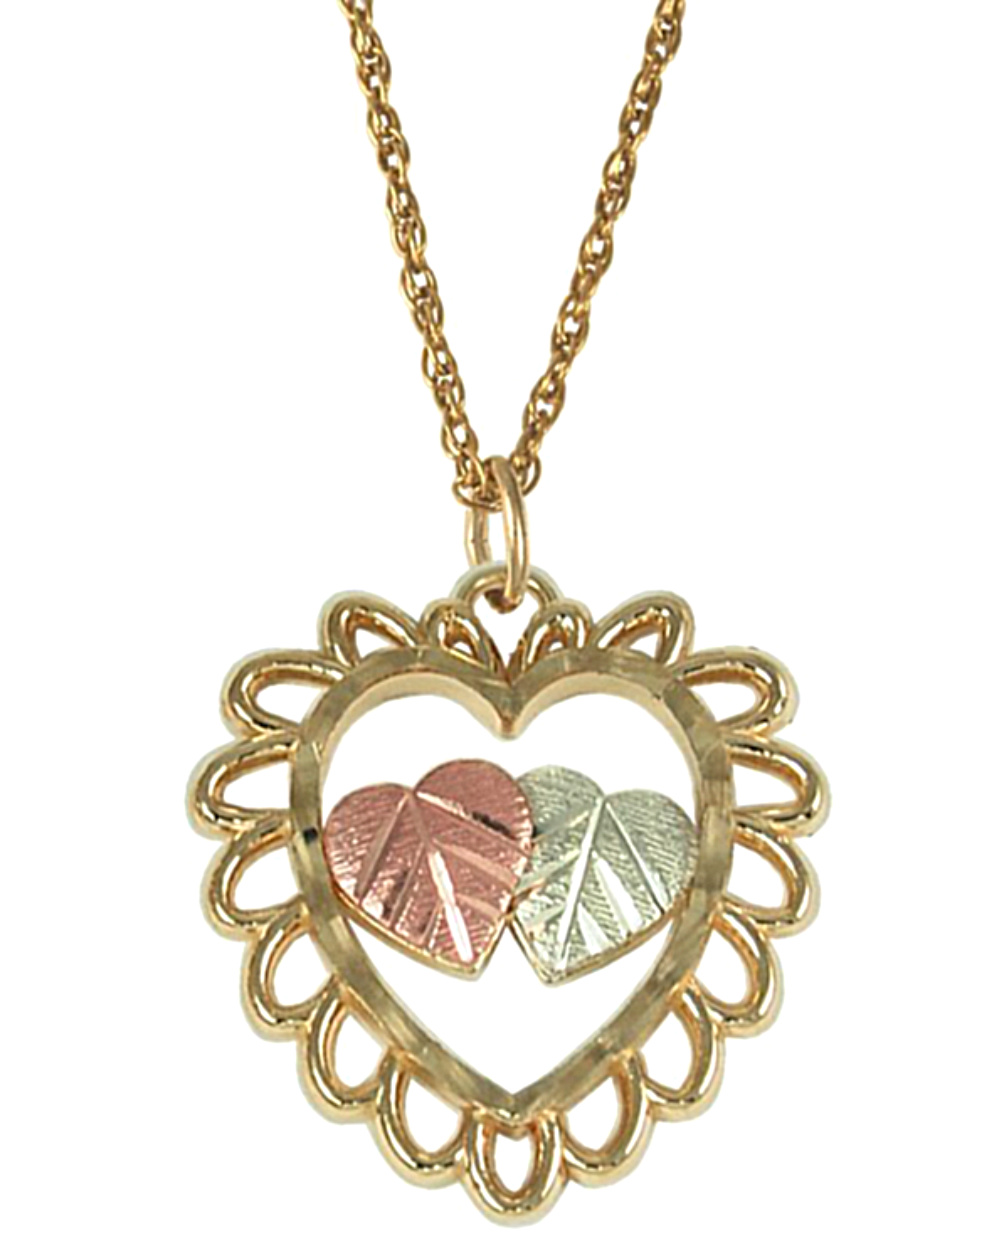 Hearts within a Diamond Cut Heart Necklace, 10k Yellow Gold, 12k Green and Rose Gold Black Hills Gold Motif